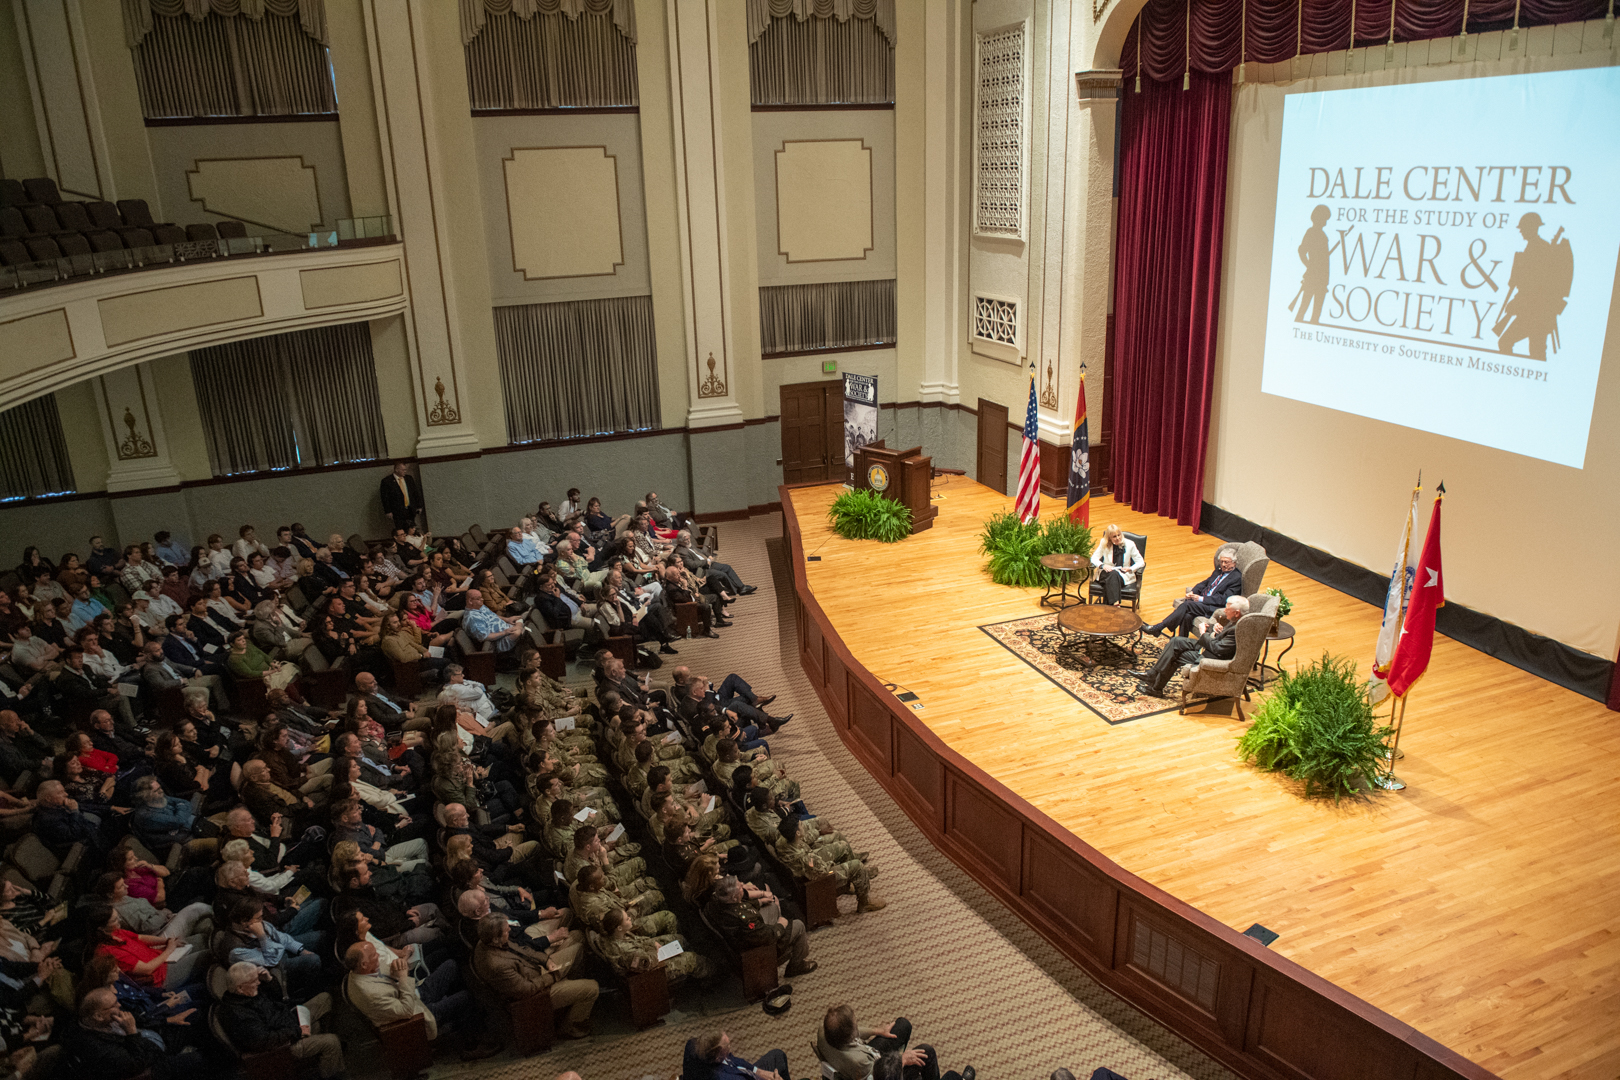 Reflections on Legacy of Operation Iraqi Freedom During Dale Lecture Event at USM